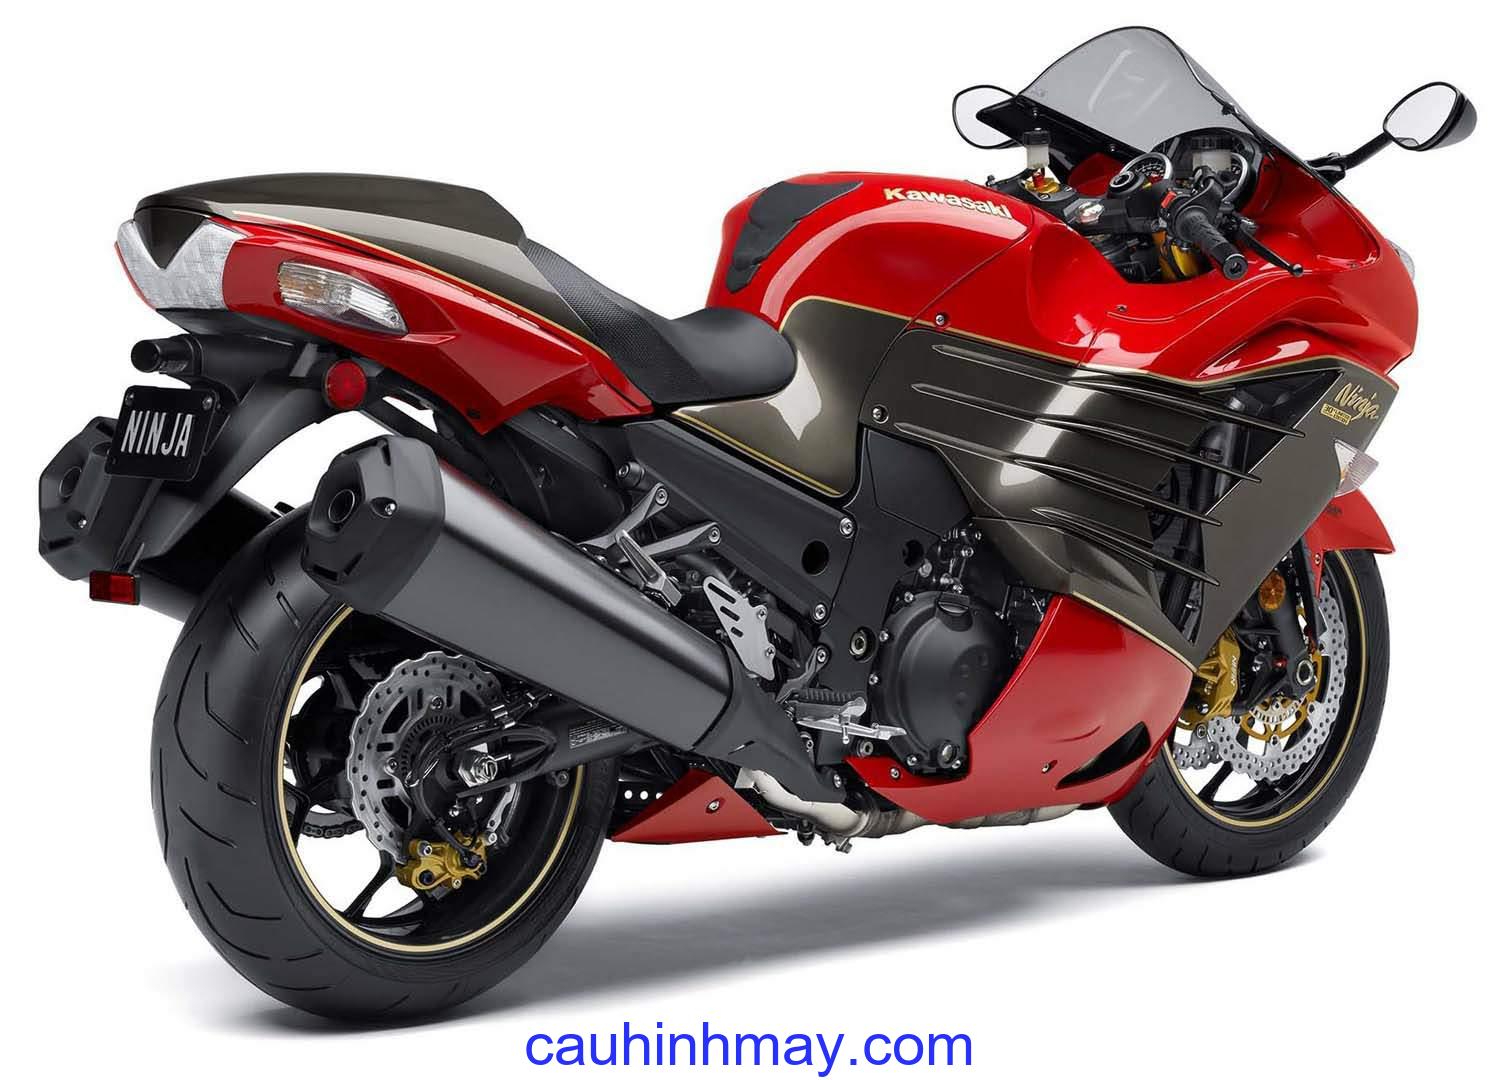 KAWASAKI ZX-14 30TH ANNIVERSERY LIMITED EDITION - cauhinhmay.com